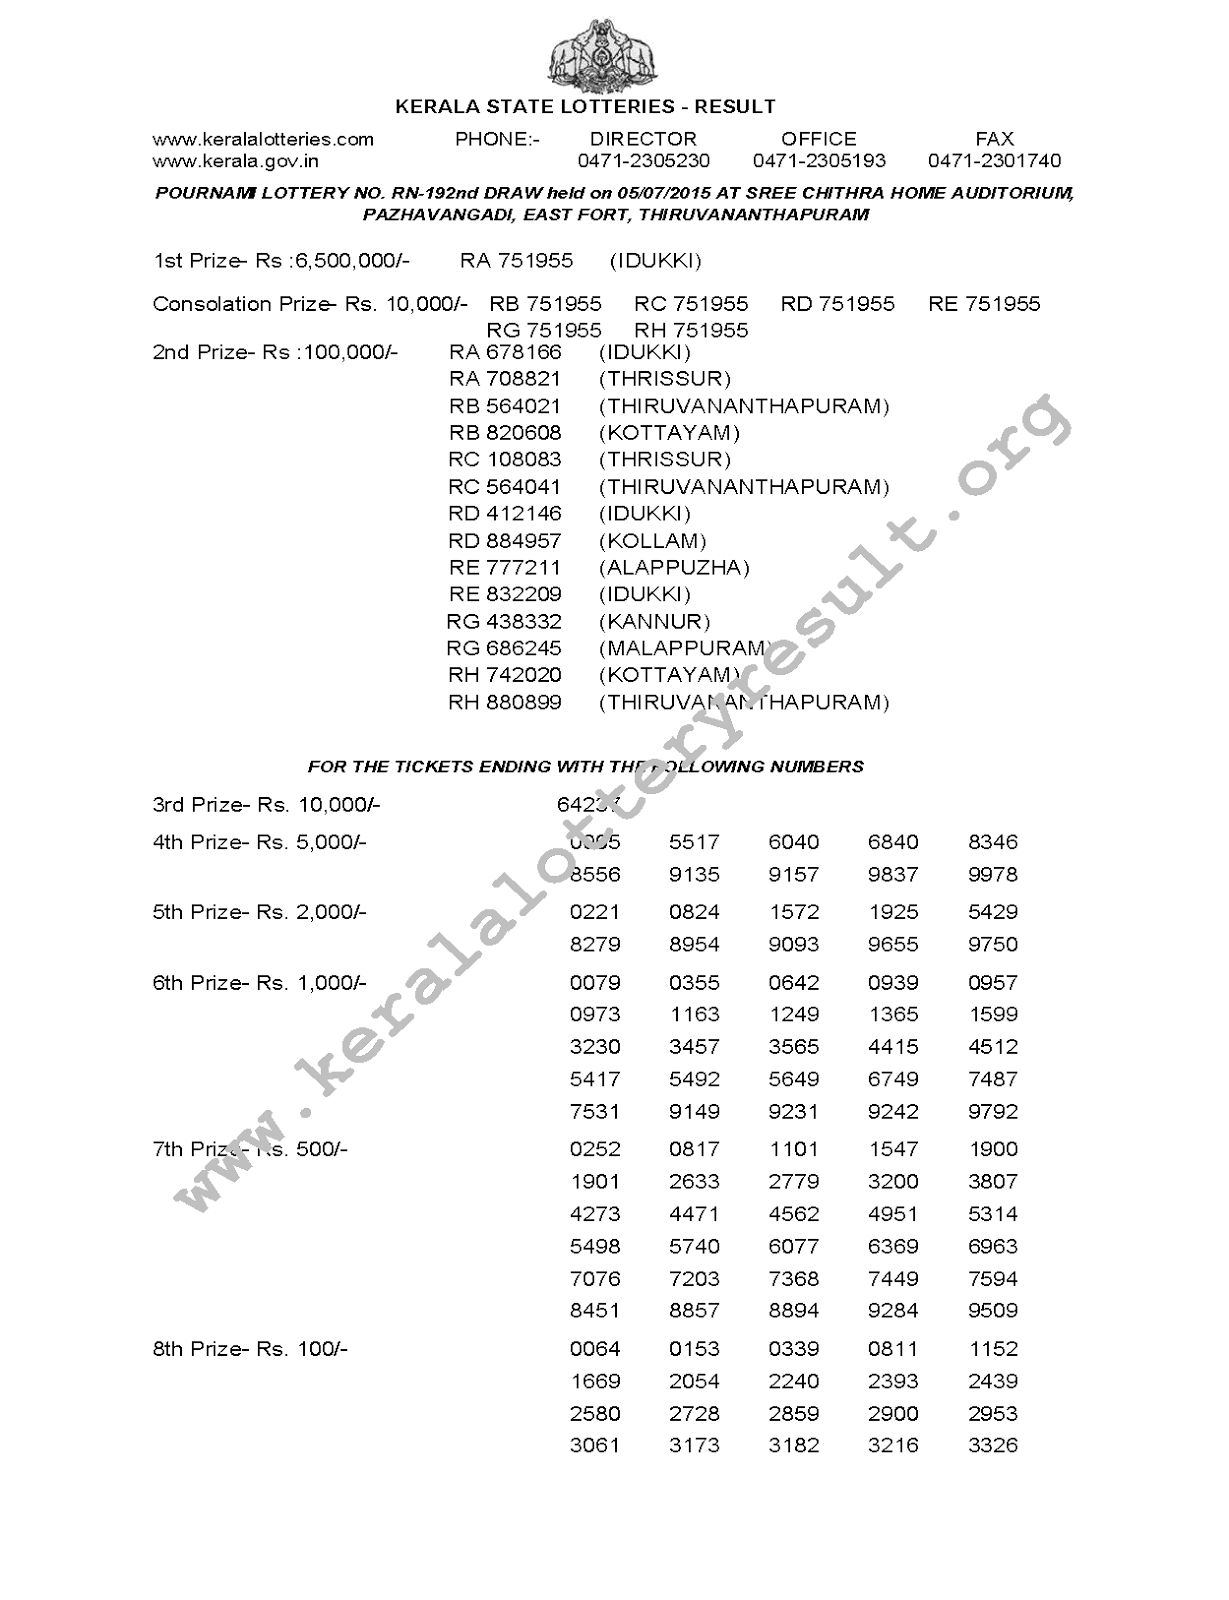 POURNAMI Lottery RN 192 Result 5-7-2015